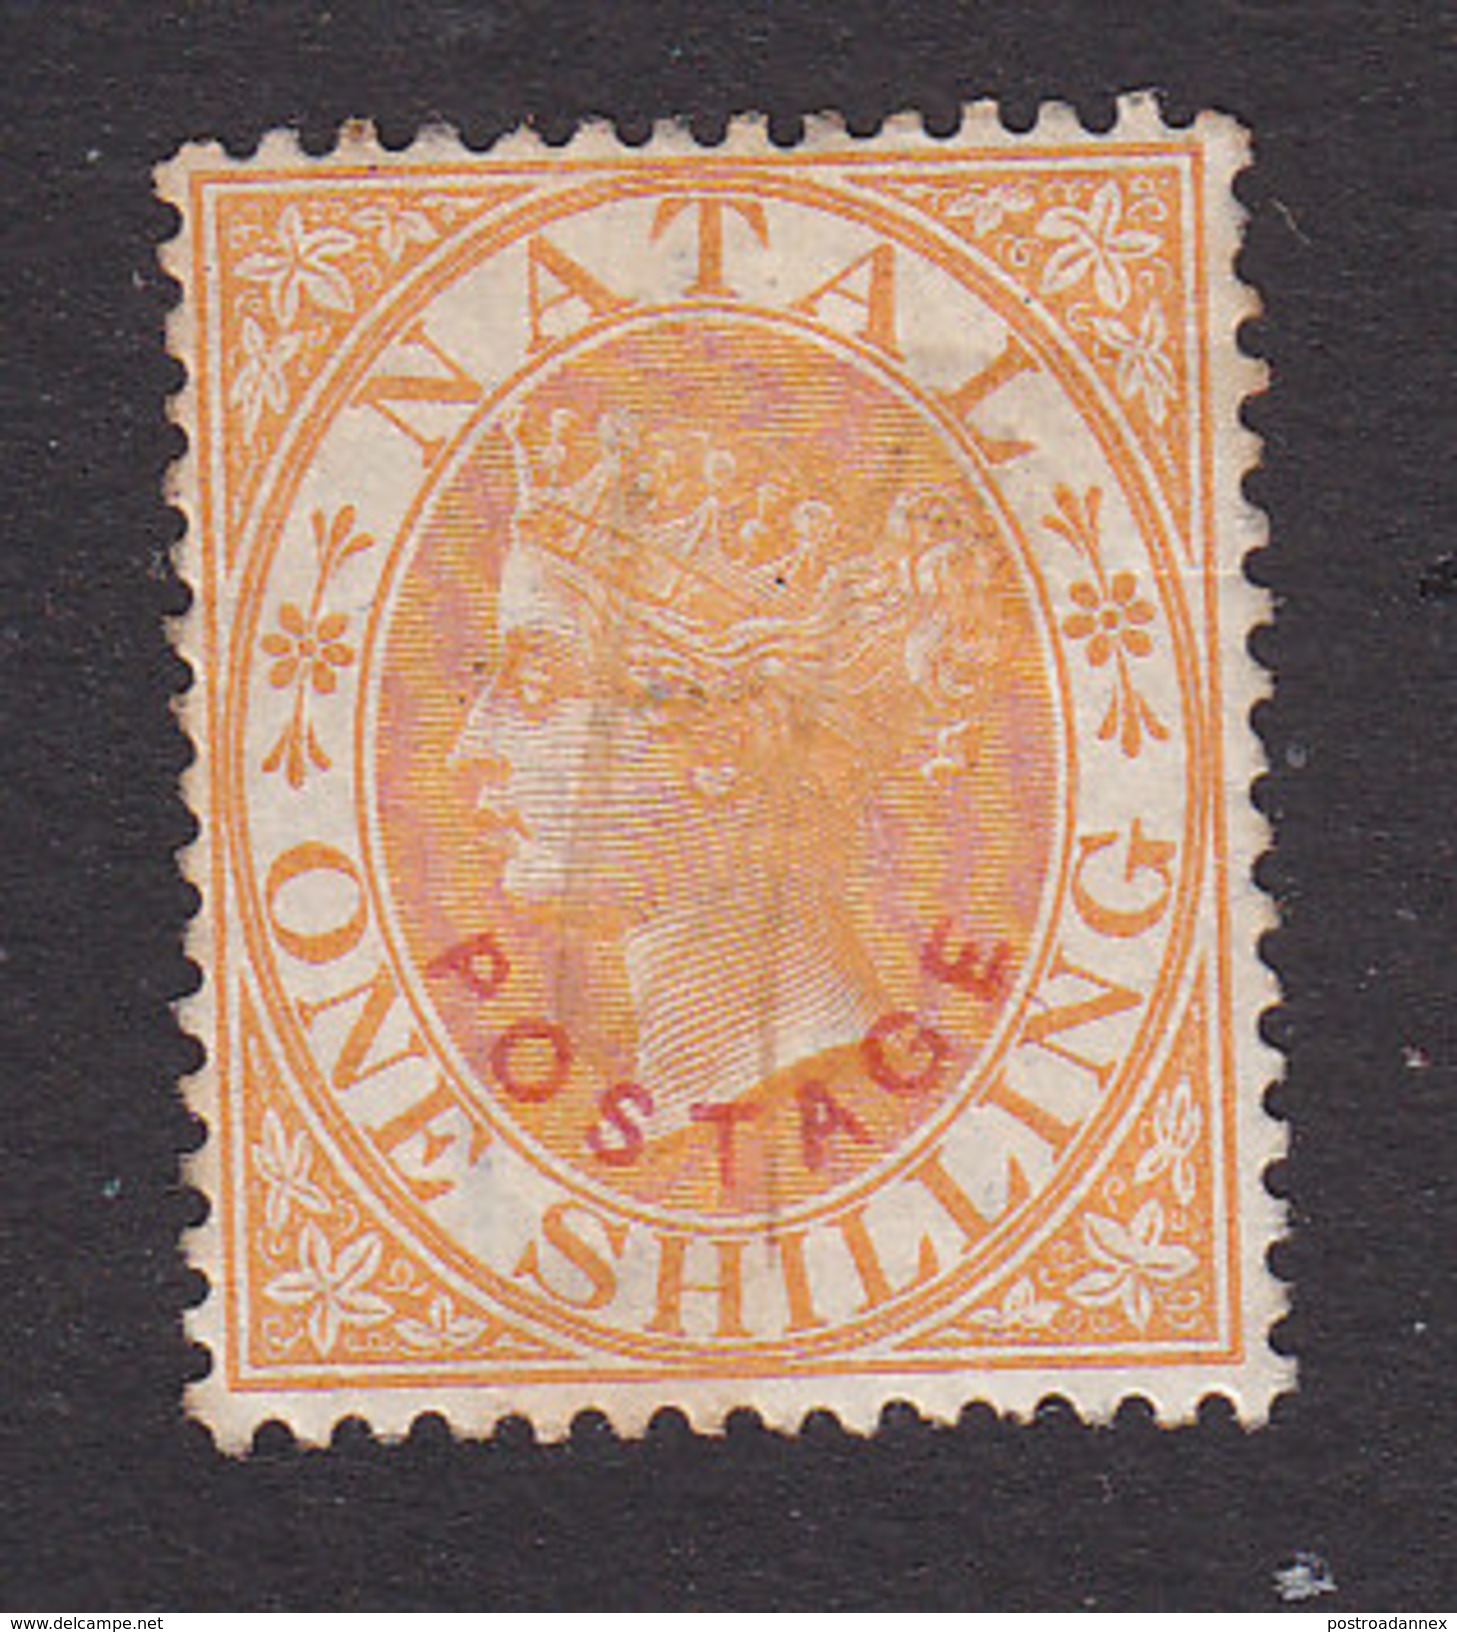 Natal, Scott #76, Used, Queen Victoria Overprinted, Issued 1888 - Natal (1857-1909)